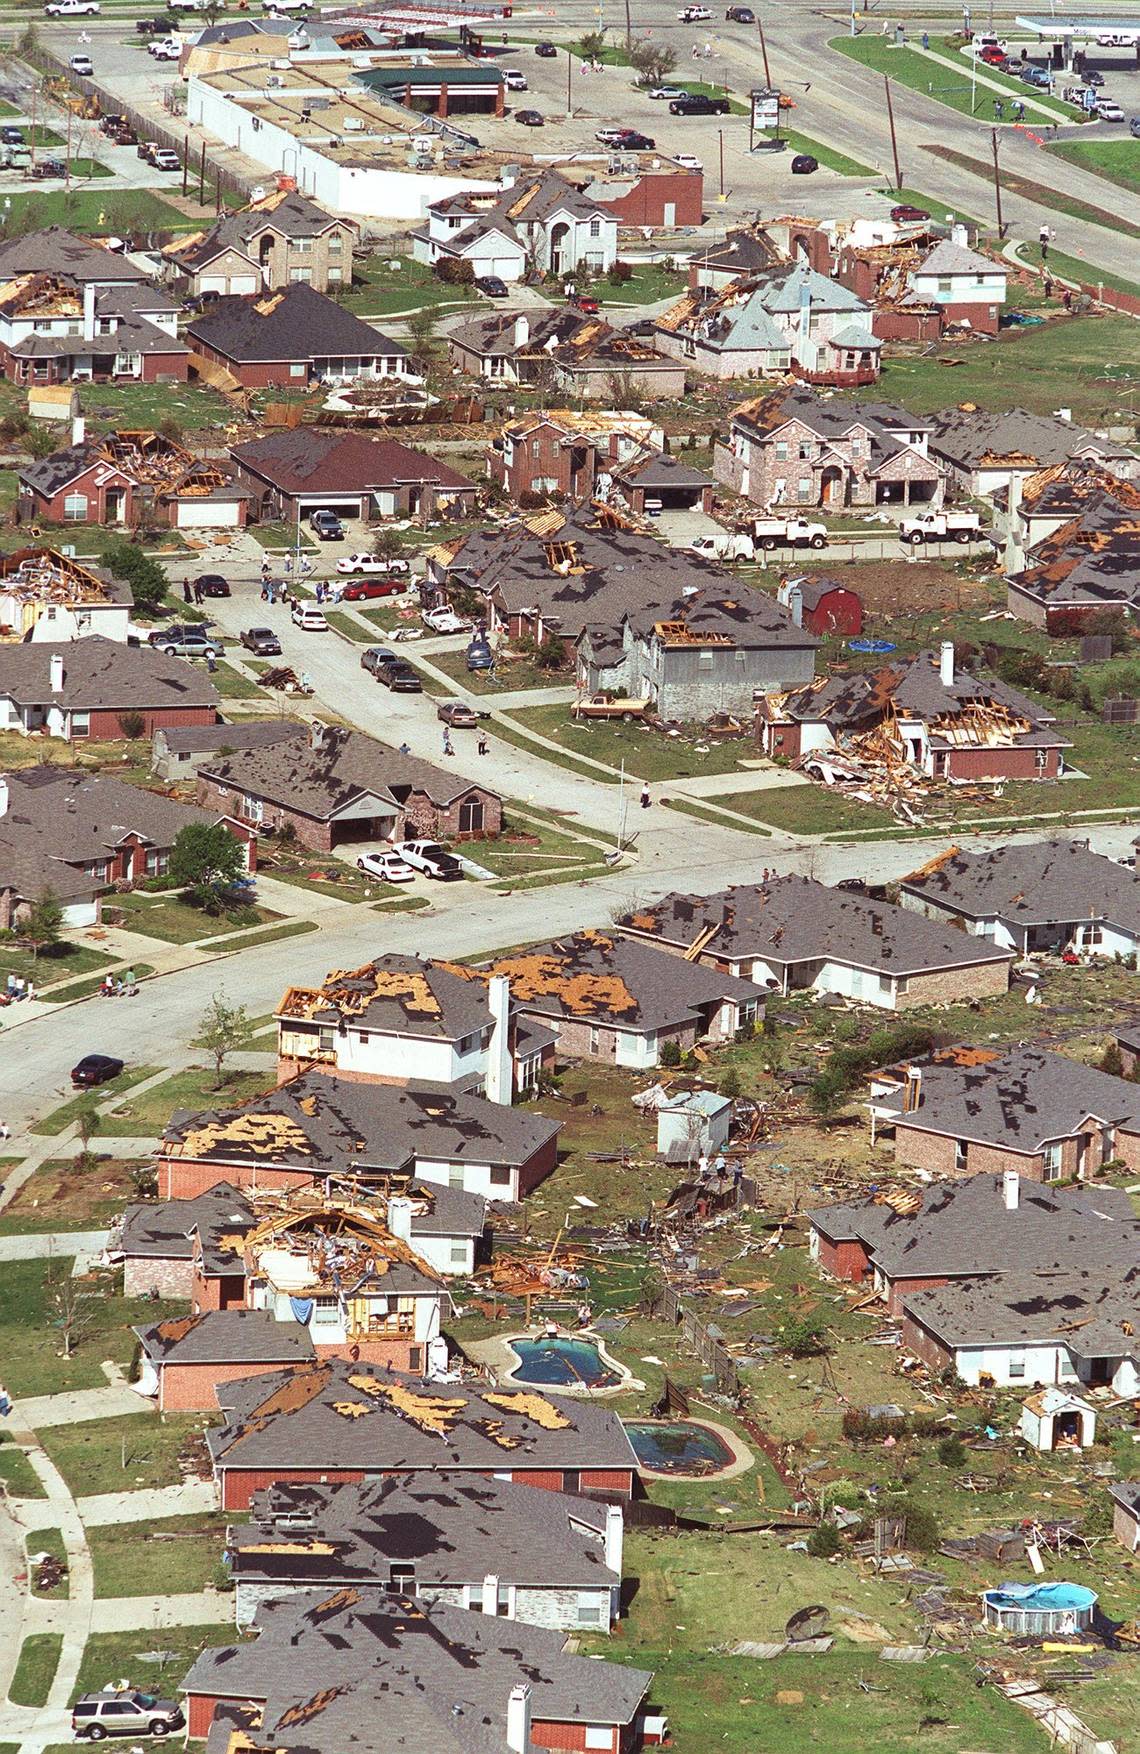 View of Arlington damage, showing Chasemore Lane with Bardin Road in the background. Streets shown are include Manor View.